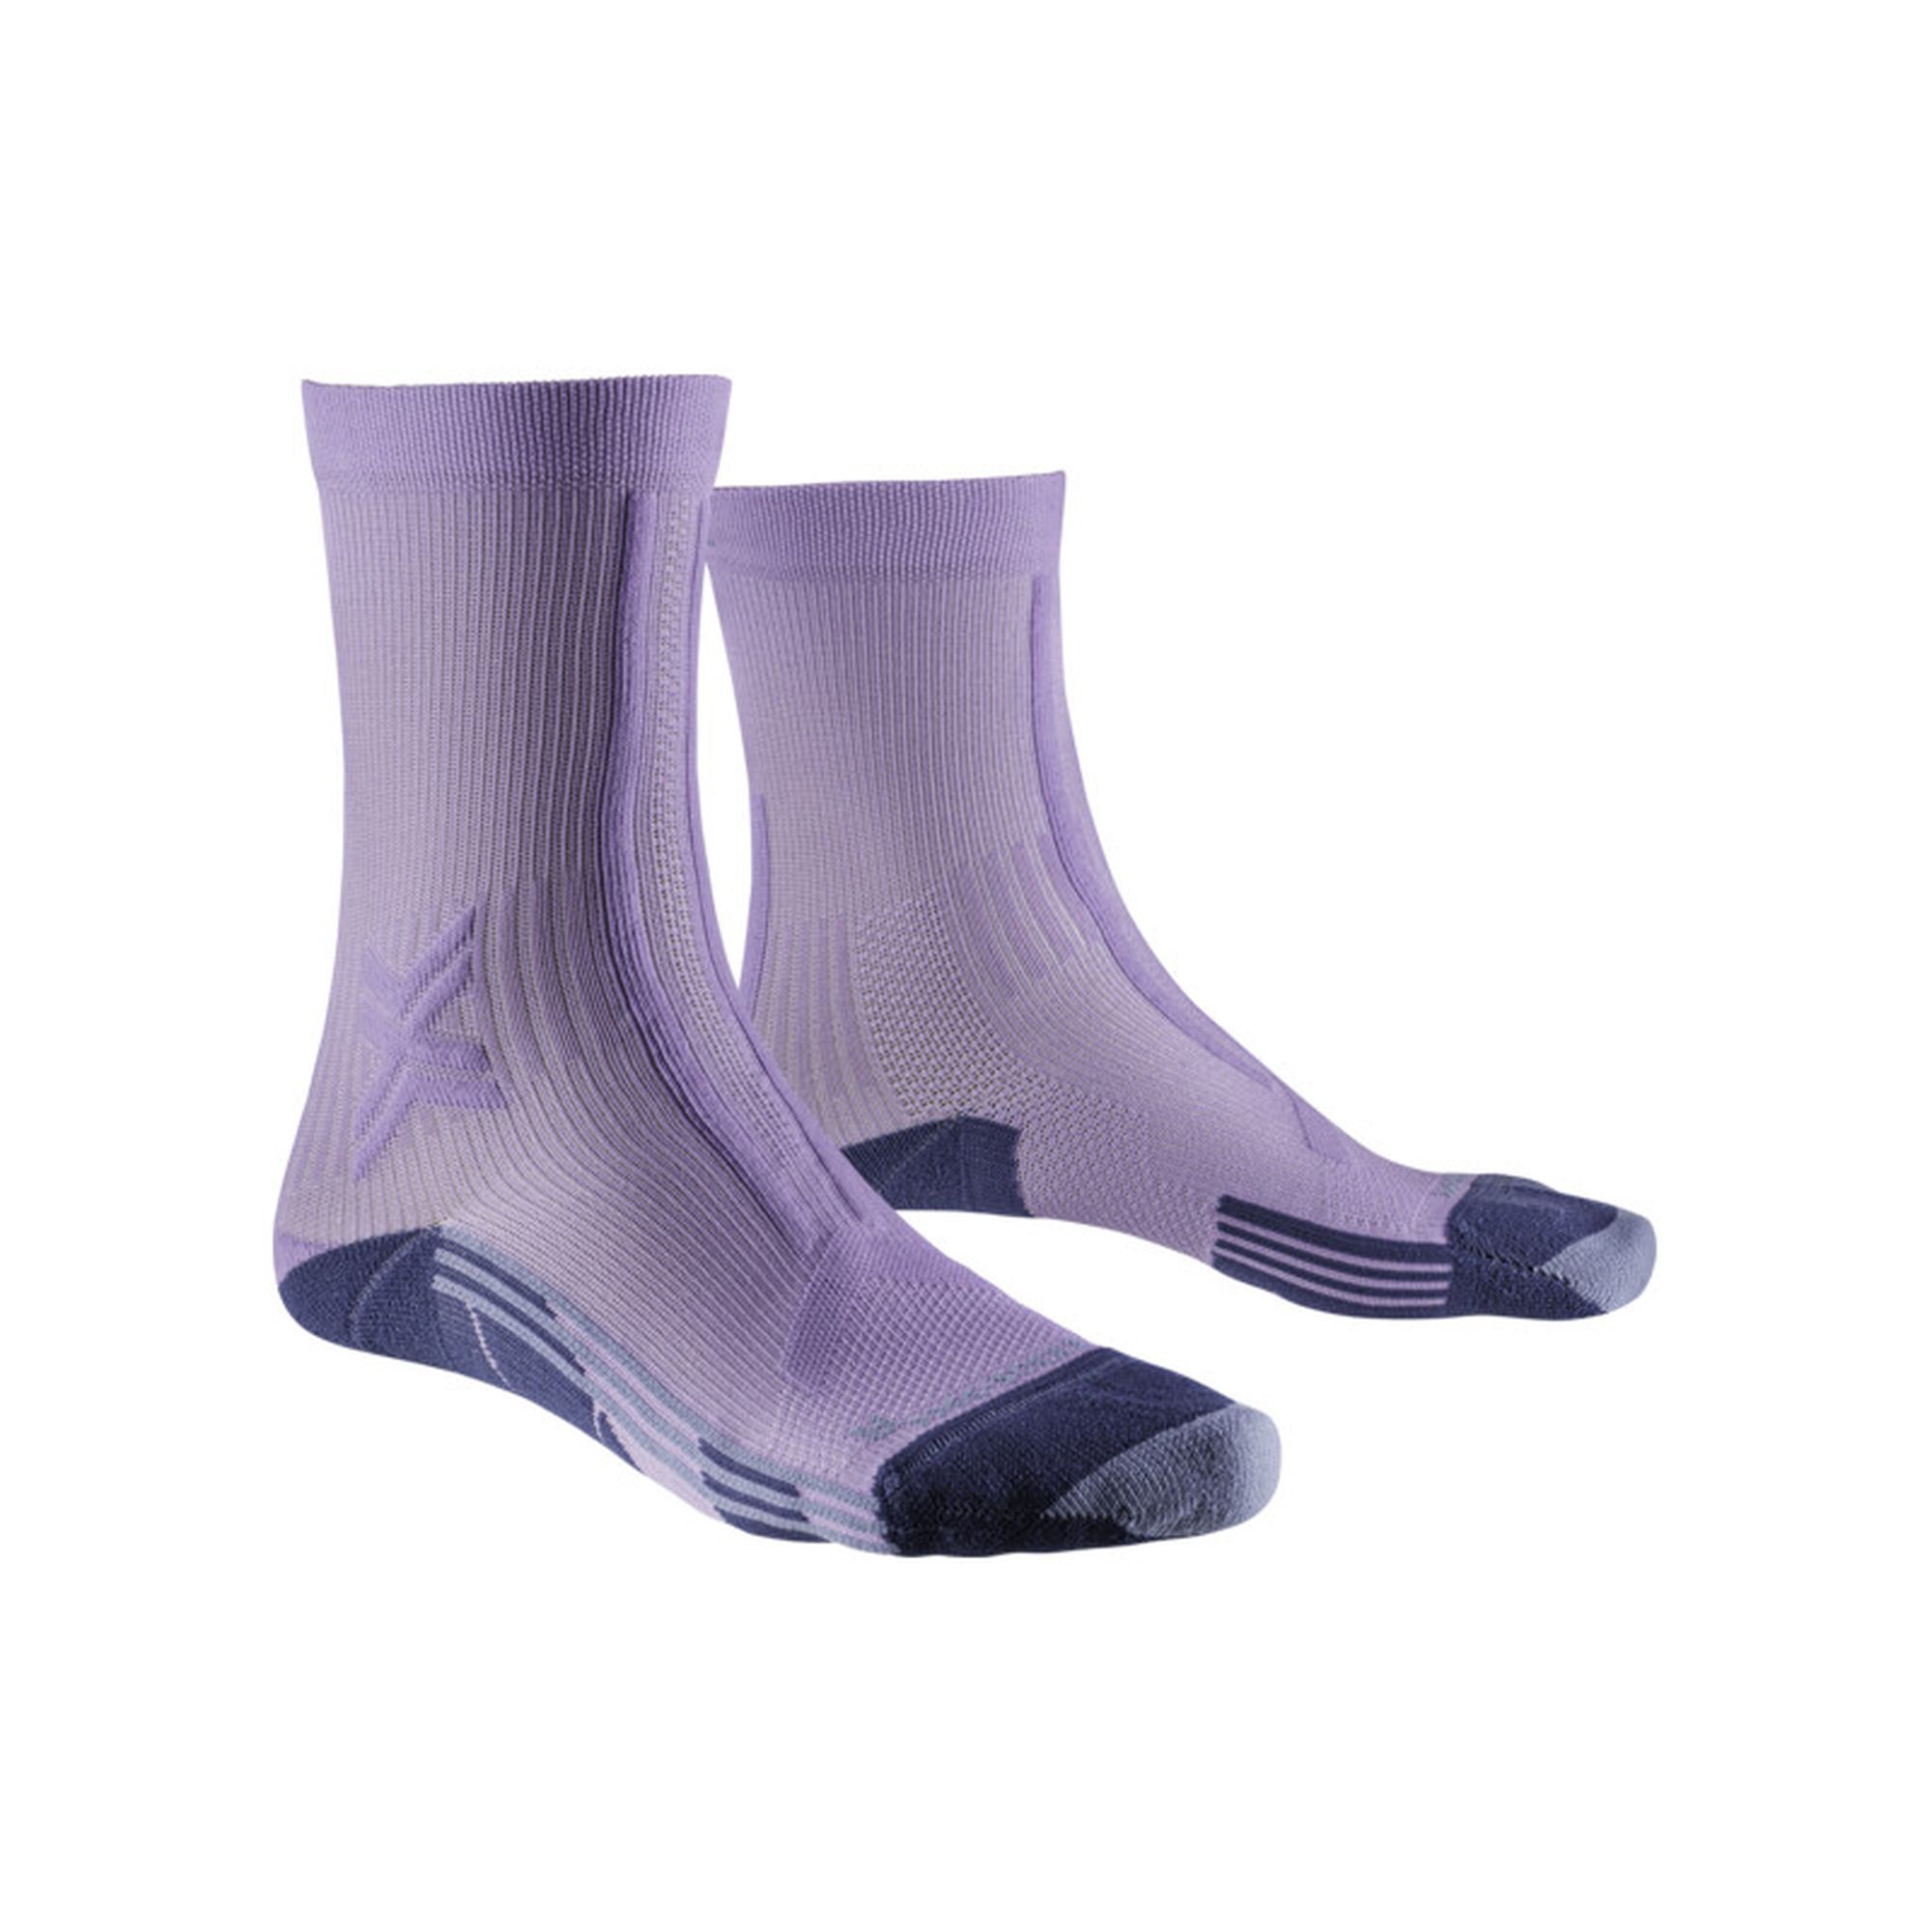 X-Socks Trail Run Discover Crew - Calcetines trail running - Mujer | Hardloop